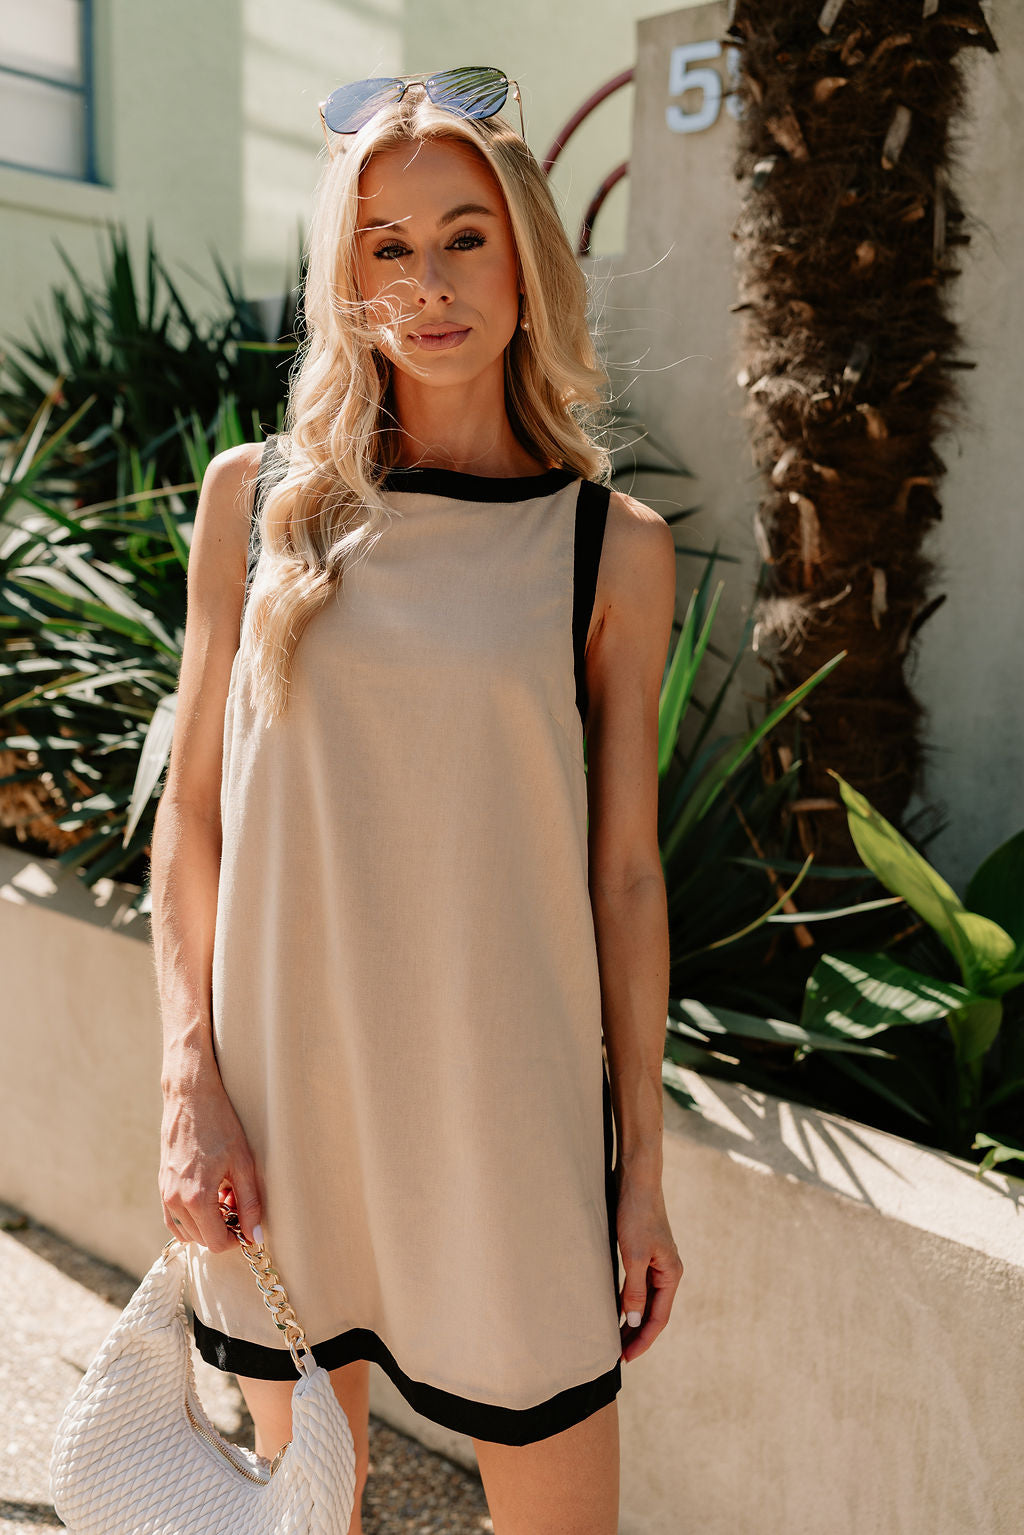 Front view of female model wearing the Camila Oatmeal & Black Sleeveless Mini Dress which features Tan Linen Fabric, Black Trim Details,Tan Lining, Mini Length, Round Neckline, Sleeveless and Monochrome Back Zipper with Hook Closure